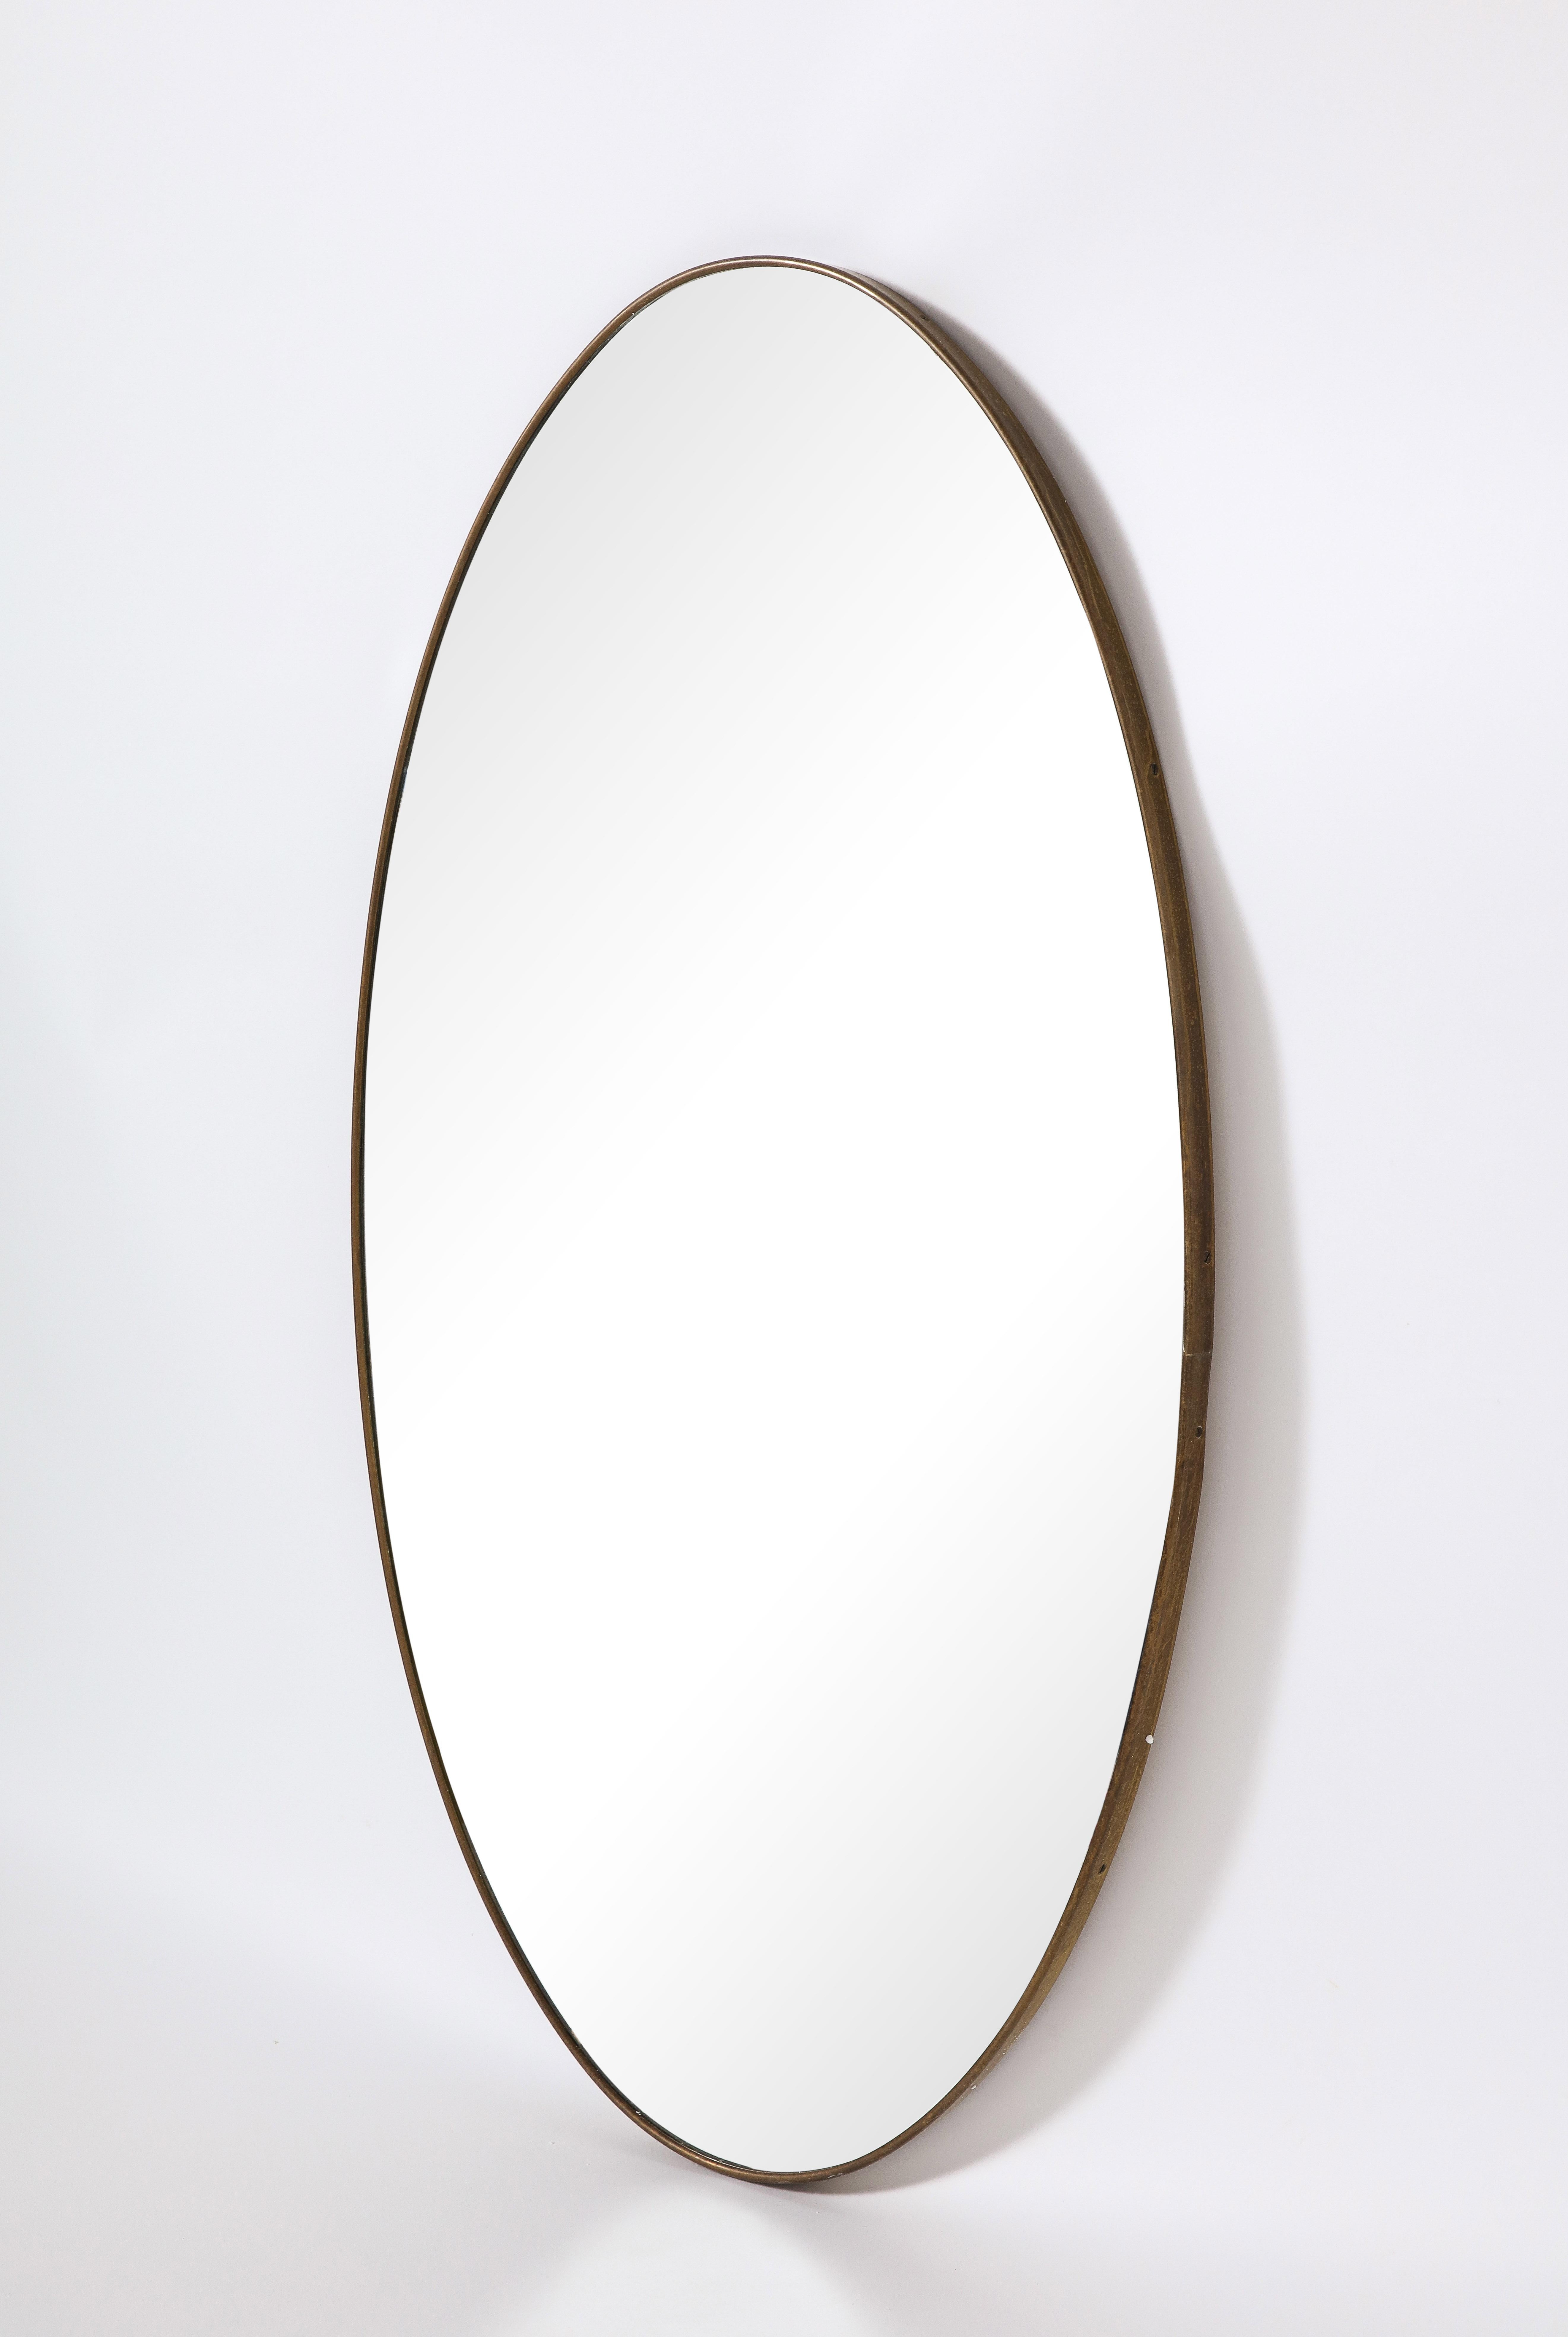 Italian Modernist Brass Oval Grand Scale Wall Mirror, Italy, circa 1950 For Sale 2